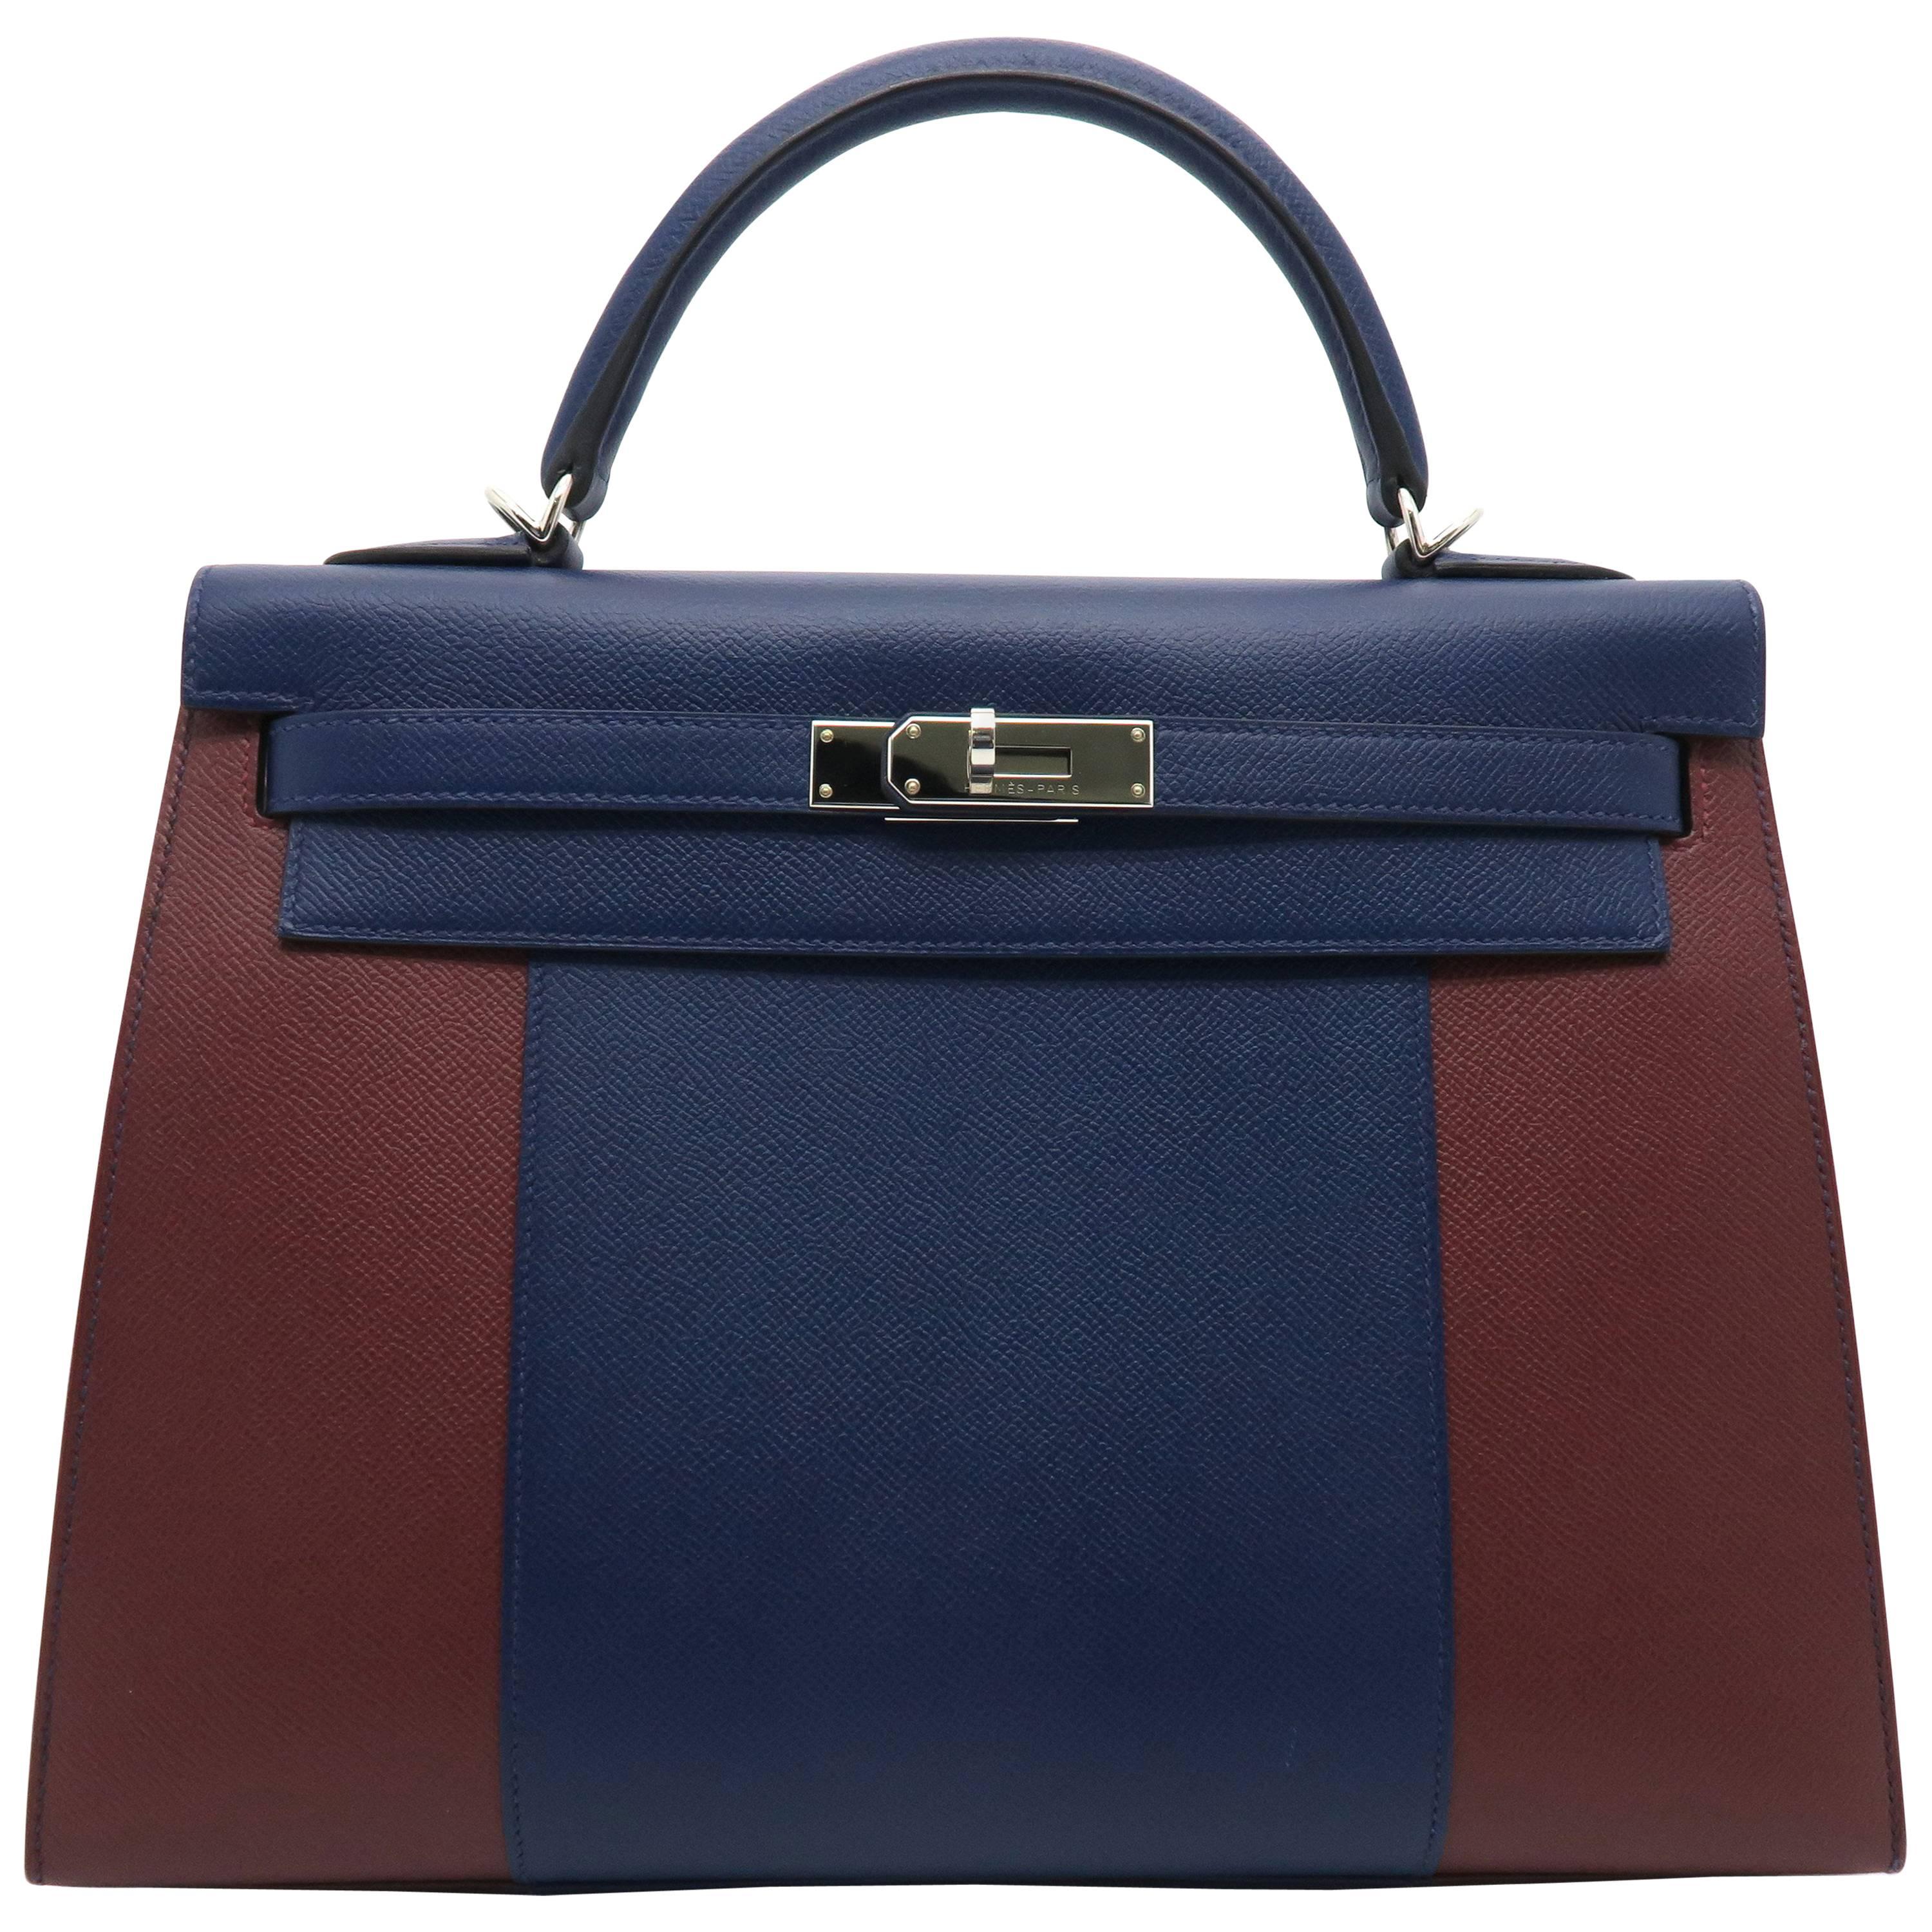 Hermes Kelly 32 Navy Blue and Red Epsom Leather Top Handle Bag